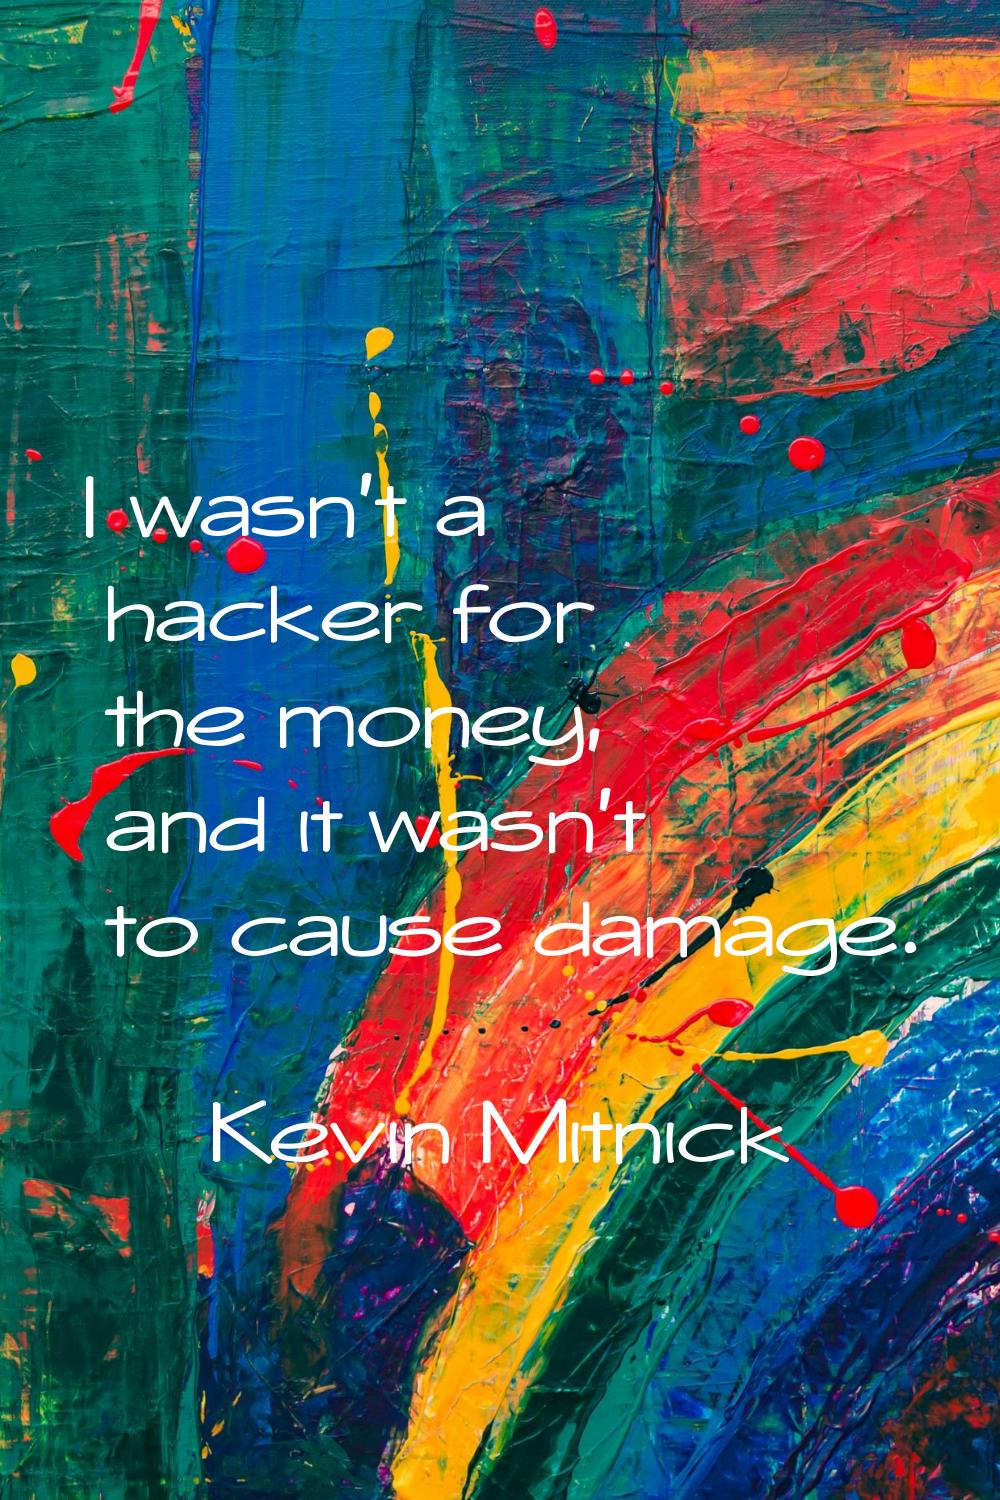 I wasn't a hacker for the money, and it wasn't to cause damage.